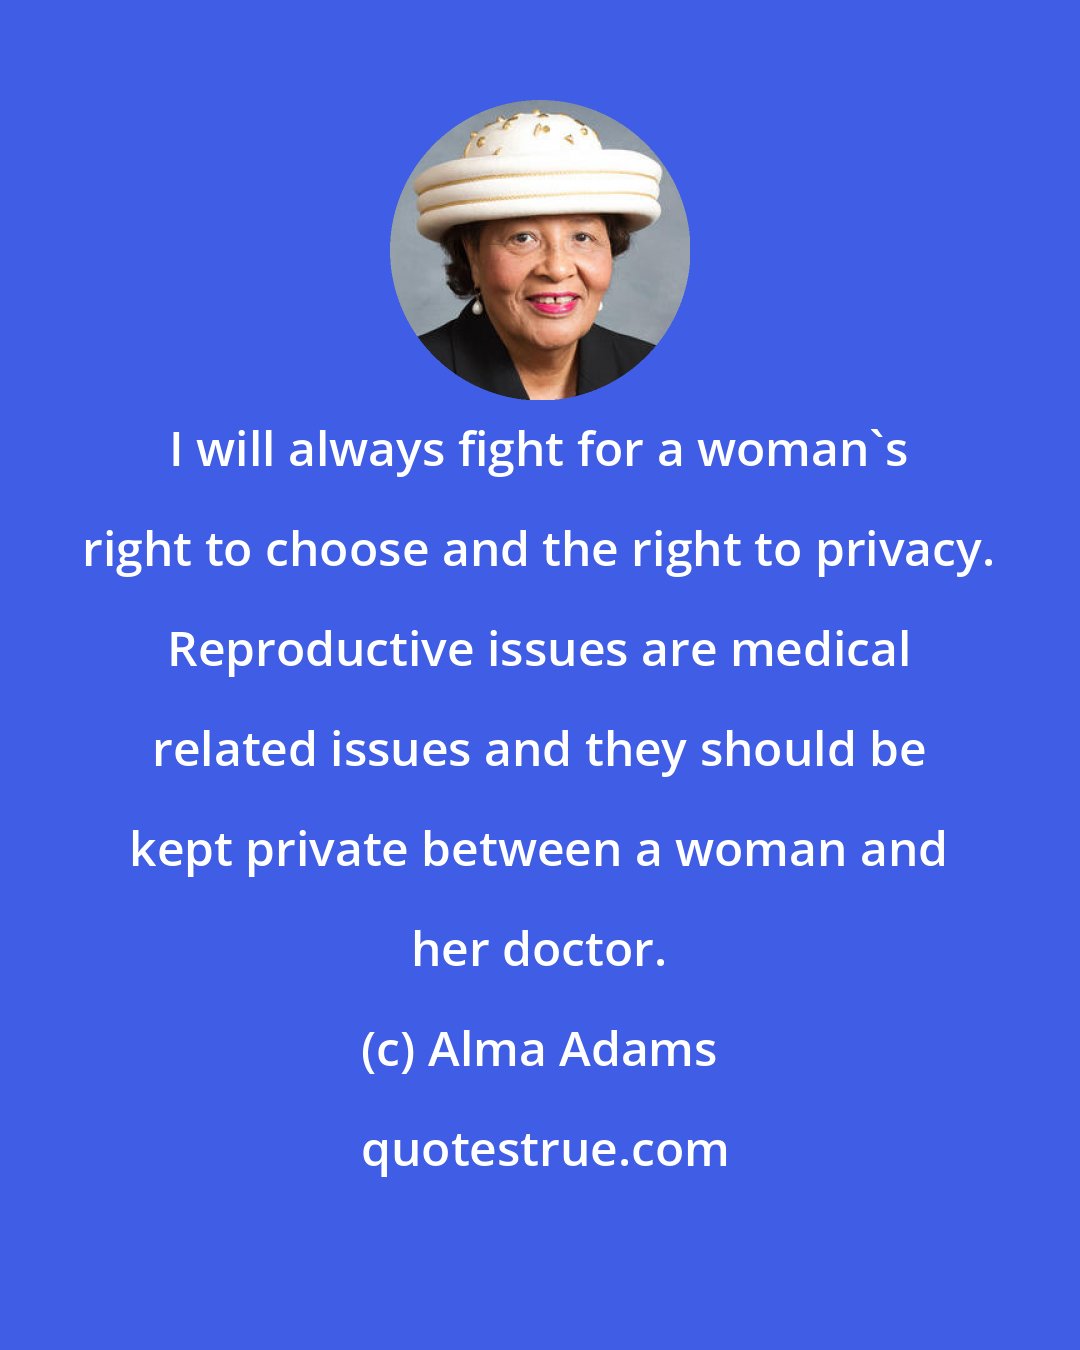 Alma Adams: I will always fight for a woman's right to choose and the right to privacy. Reproductive issues are medical related issues and they should be kept private between a woman and her doctor.